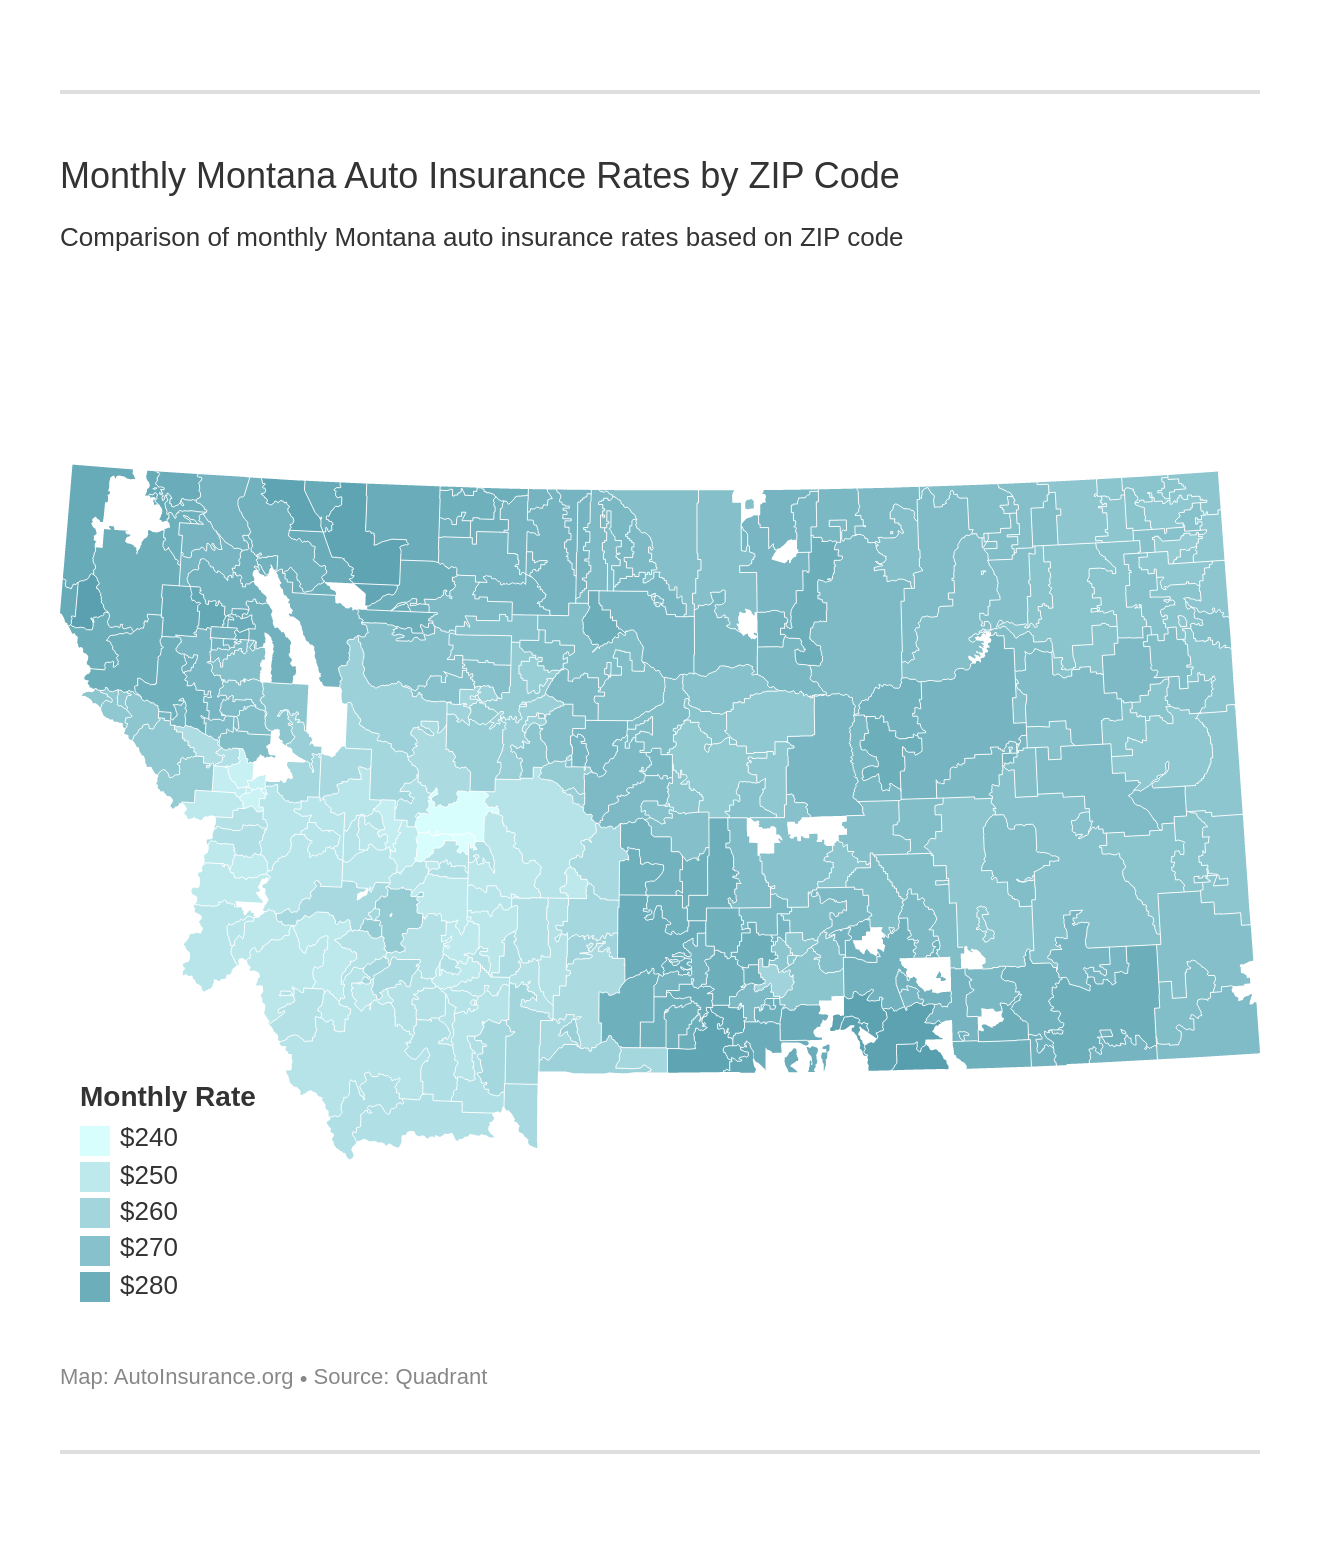 Monthly Montana Auto Insurance Rates by ZIP Code